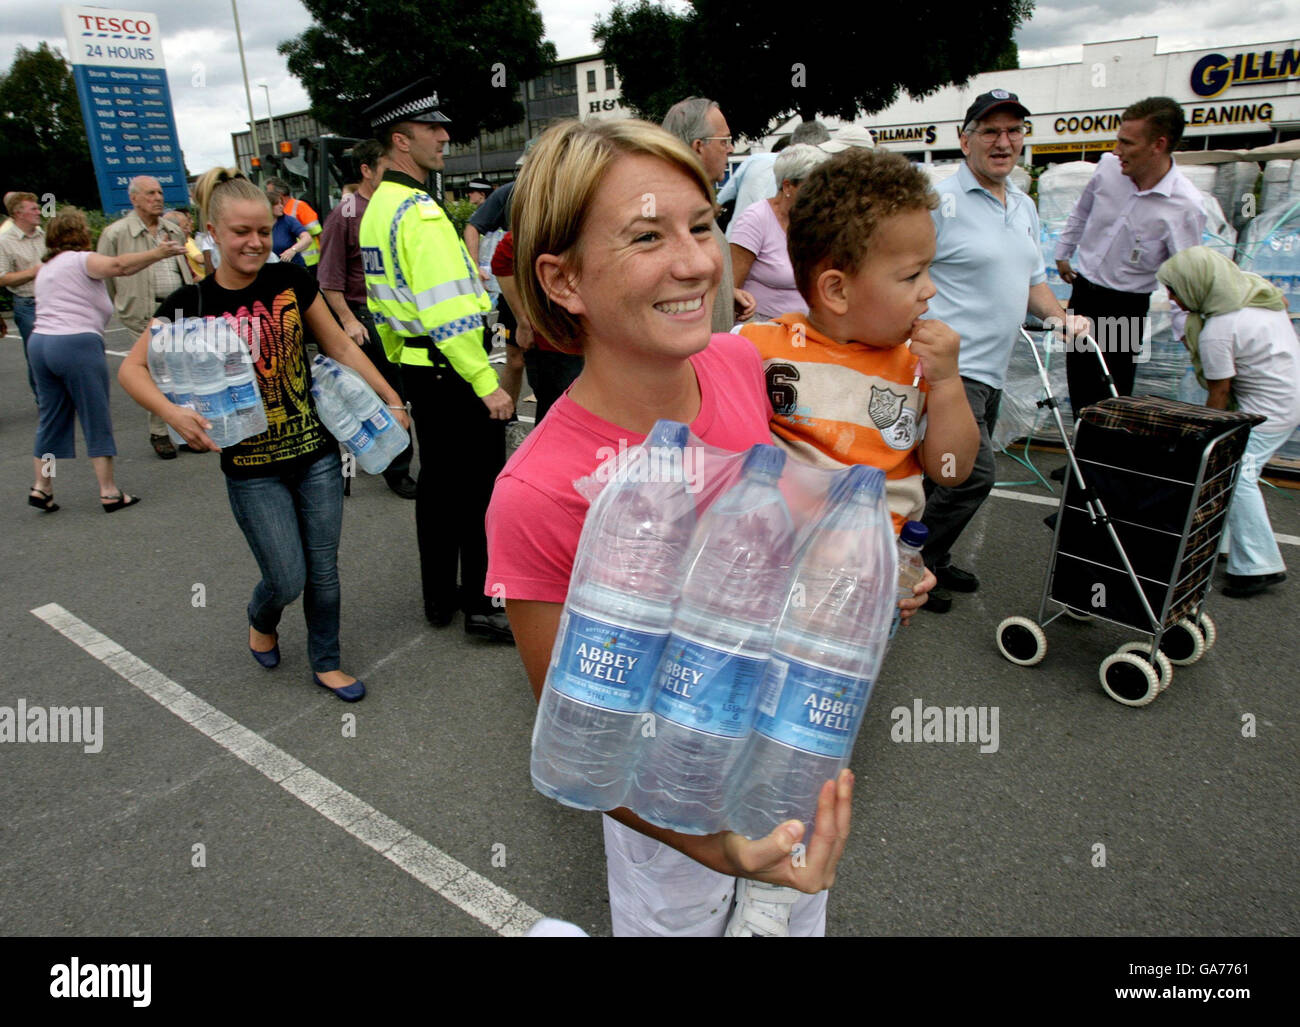 Members of the public collect emergency water at a Tesco superstore in Gloucester two days after the area's water supply was switched off. Stock Photo